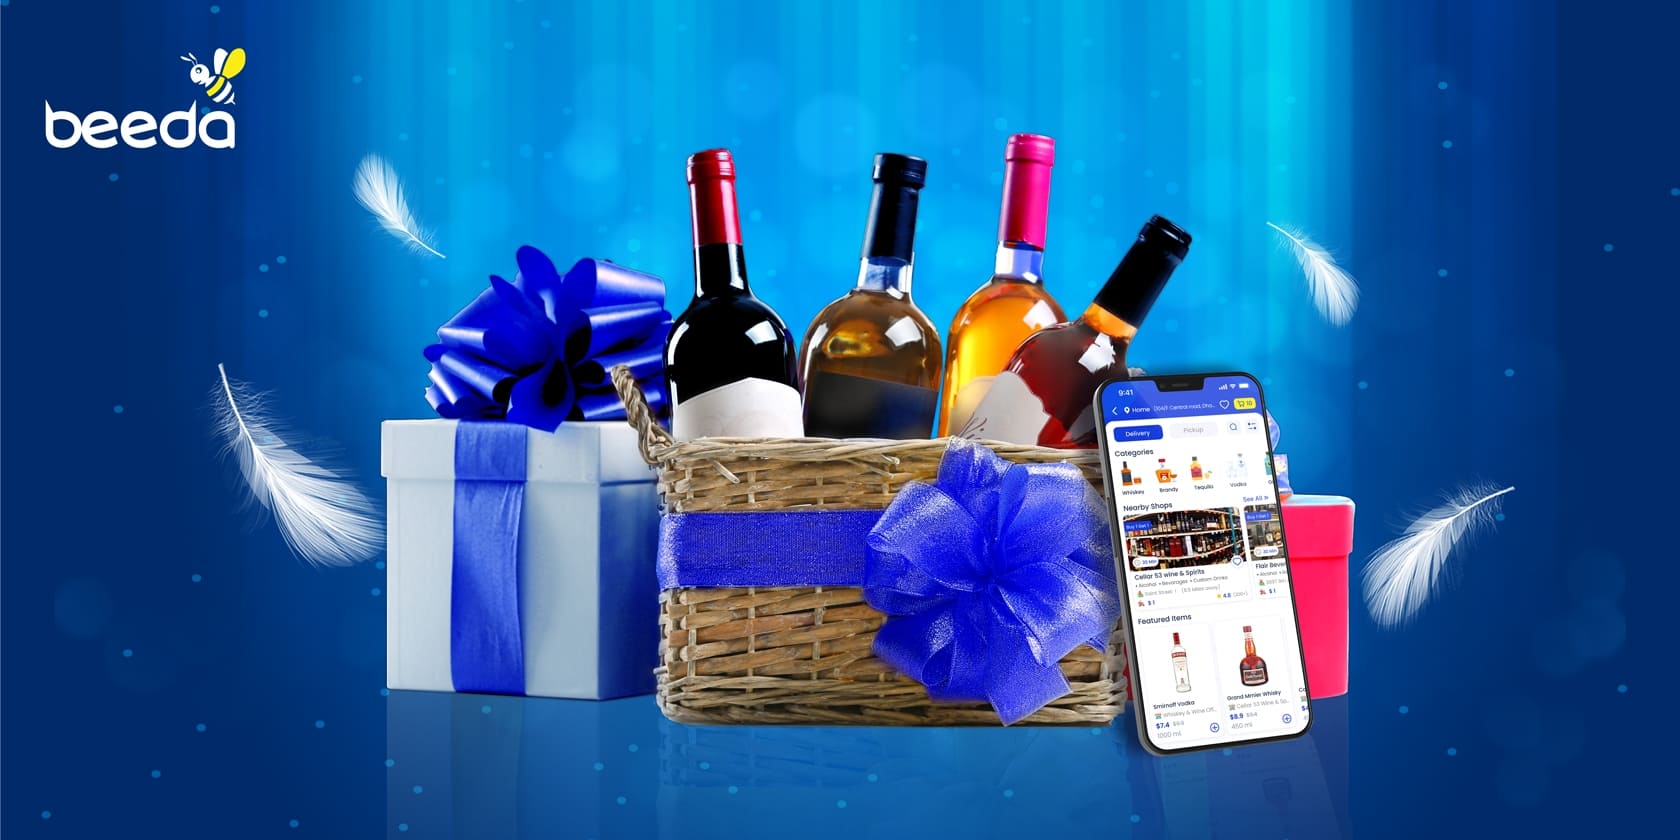 The Best Liquor Gift Delivery Service & Top Drinks in 2023